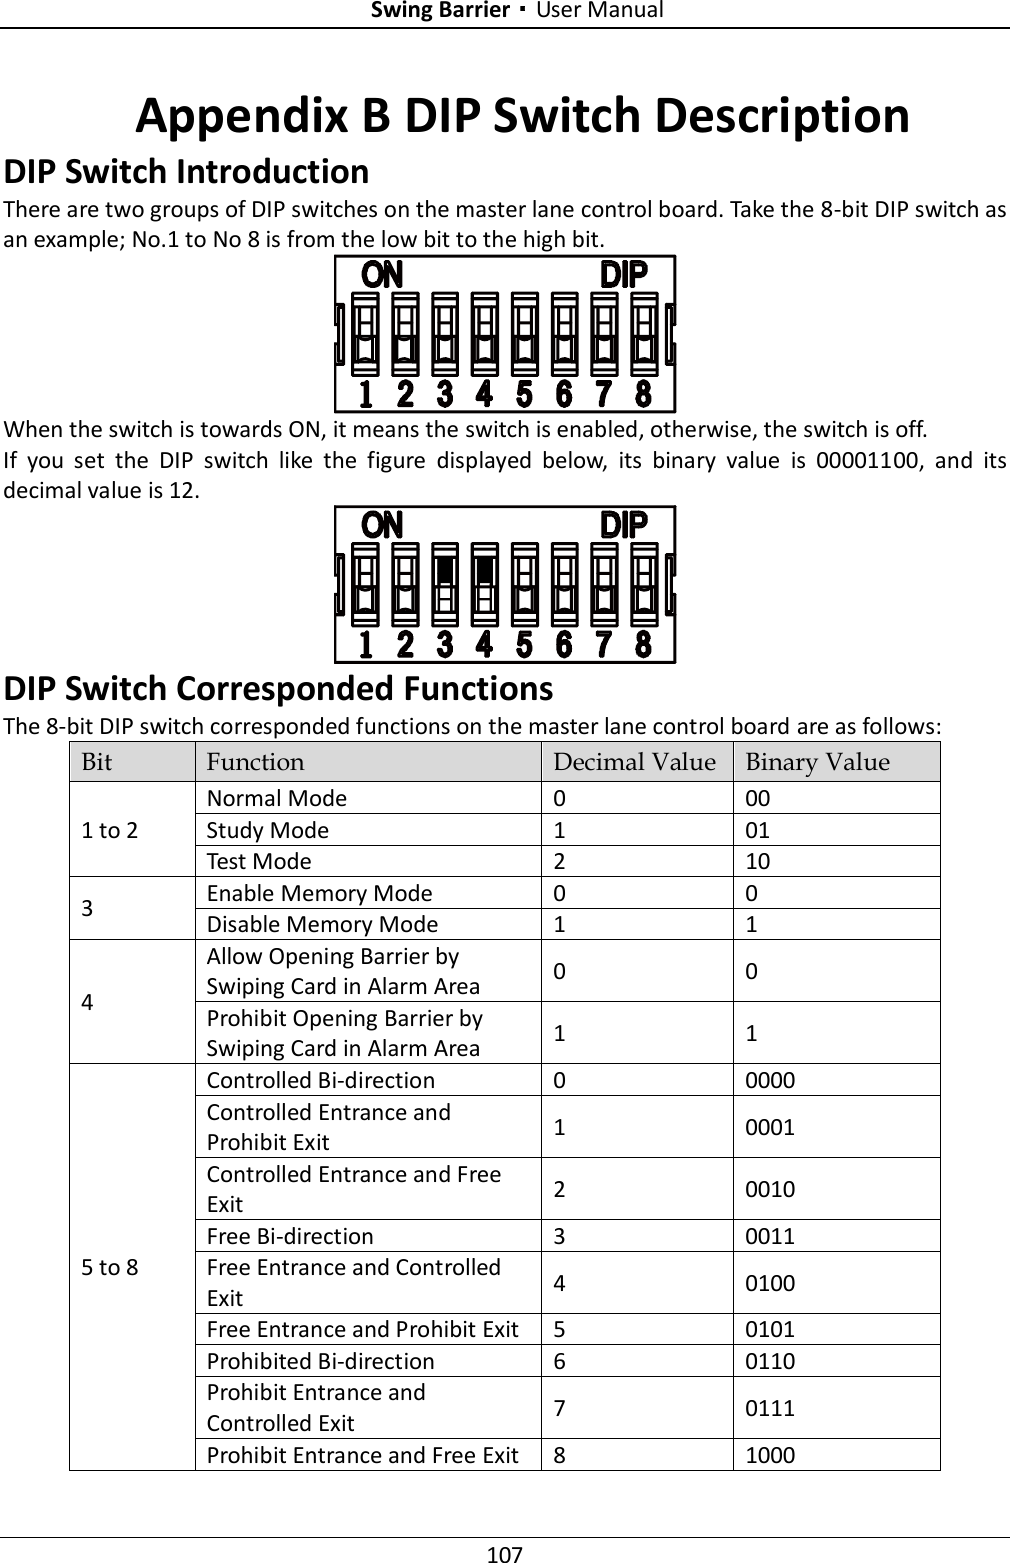 Swing Barrier·User Manual 107 Appendix B DIP Switch Description   DIP Switch Introduction There are two groups of DIP switches on the master lane control board. Take the 8-bit DIP switch as an example; No.1 to No 8 is from the low bit to the high bit.  When the switch is towards ON, it means the switch is enabled, otherwise, the switch is off. If  you  set  the  DIP  switch  like  the  figure  displayed  below,  its  binary  value  is  00001100,  and  its decimal value is 12.  DIP Switch Corresponded Functions The 8-bit DIP switch corresponded functions on the master lane control board are as follows: Bit Function Decimal Value Binary Value 1 to 2 Normal Mode 0 00 Study Mode 1 01 Test Mode 2 10 3 Enable Memory Mode 0 0 Disable Memory Mode 1 1 4 Allow Opening Barrier by Swiping Card in Alarm Area 0 0 Prohibit Opening Barrier by Swiping Card in Alarm Area 1 1 5 to 8 Controlled Bi-direction 0 0000 Controlled Entrance and Prohibit Exit 1 0001 Controlled Entrance and Free Exit 2 0010 Free Bi-direction 3 0011 Free Entrance and Controlled Exit 4 0100 Free Entrance and Prohibit Exit 5 0101 Prohibited Bi-direction 6 0110 Prohibit Entrance and Controlled Exit 7 0111 Prohibit Entrance and Free Exit 8 1000 